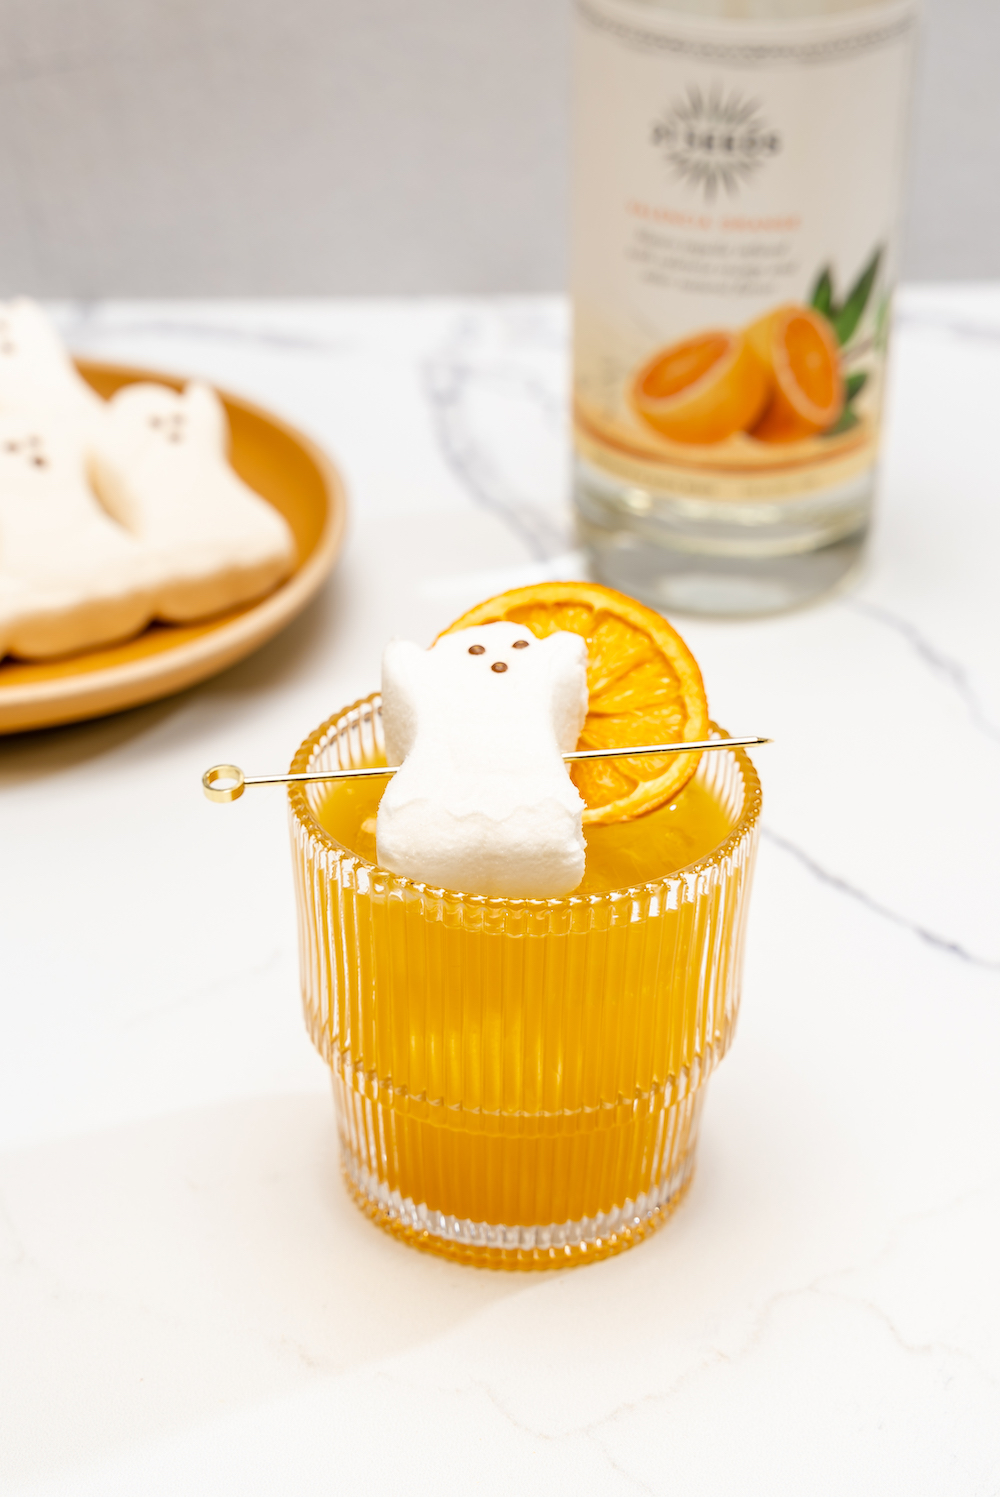 Pumpkin Pie Punch cocktail with marshmallows and orange slices, a citrusy drink with a touch of sweetness.